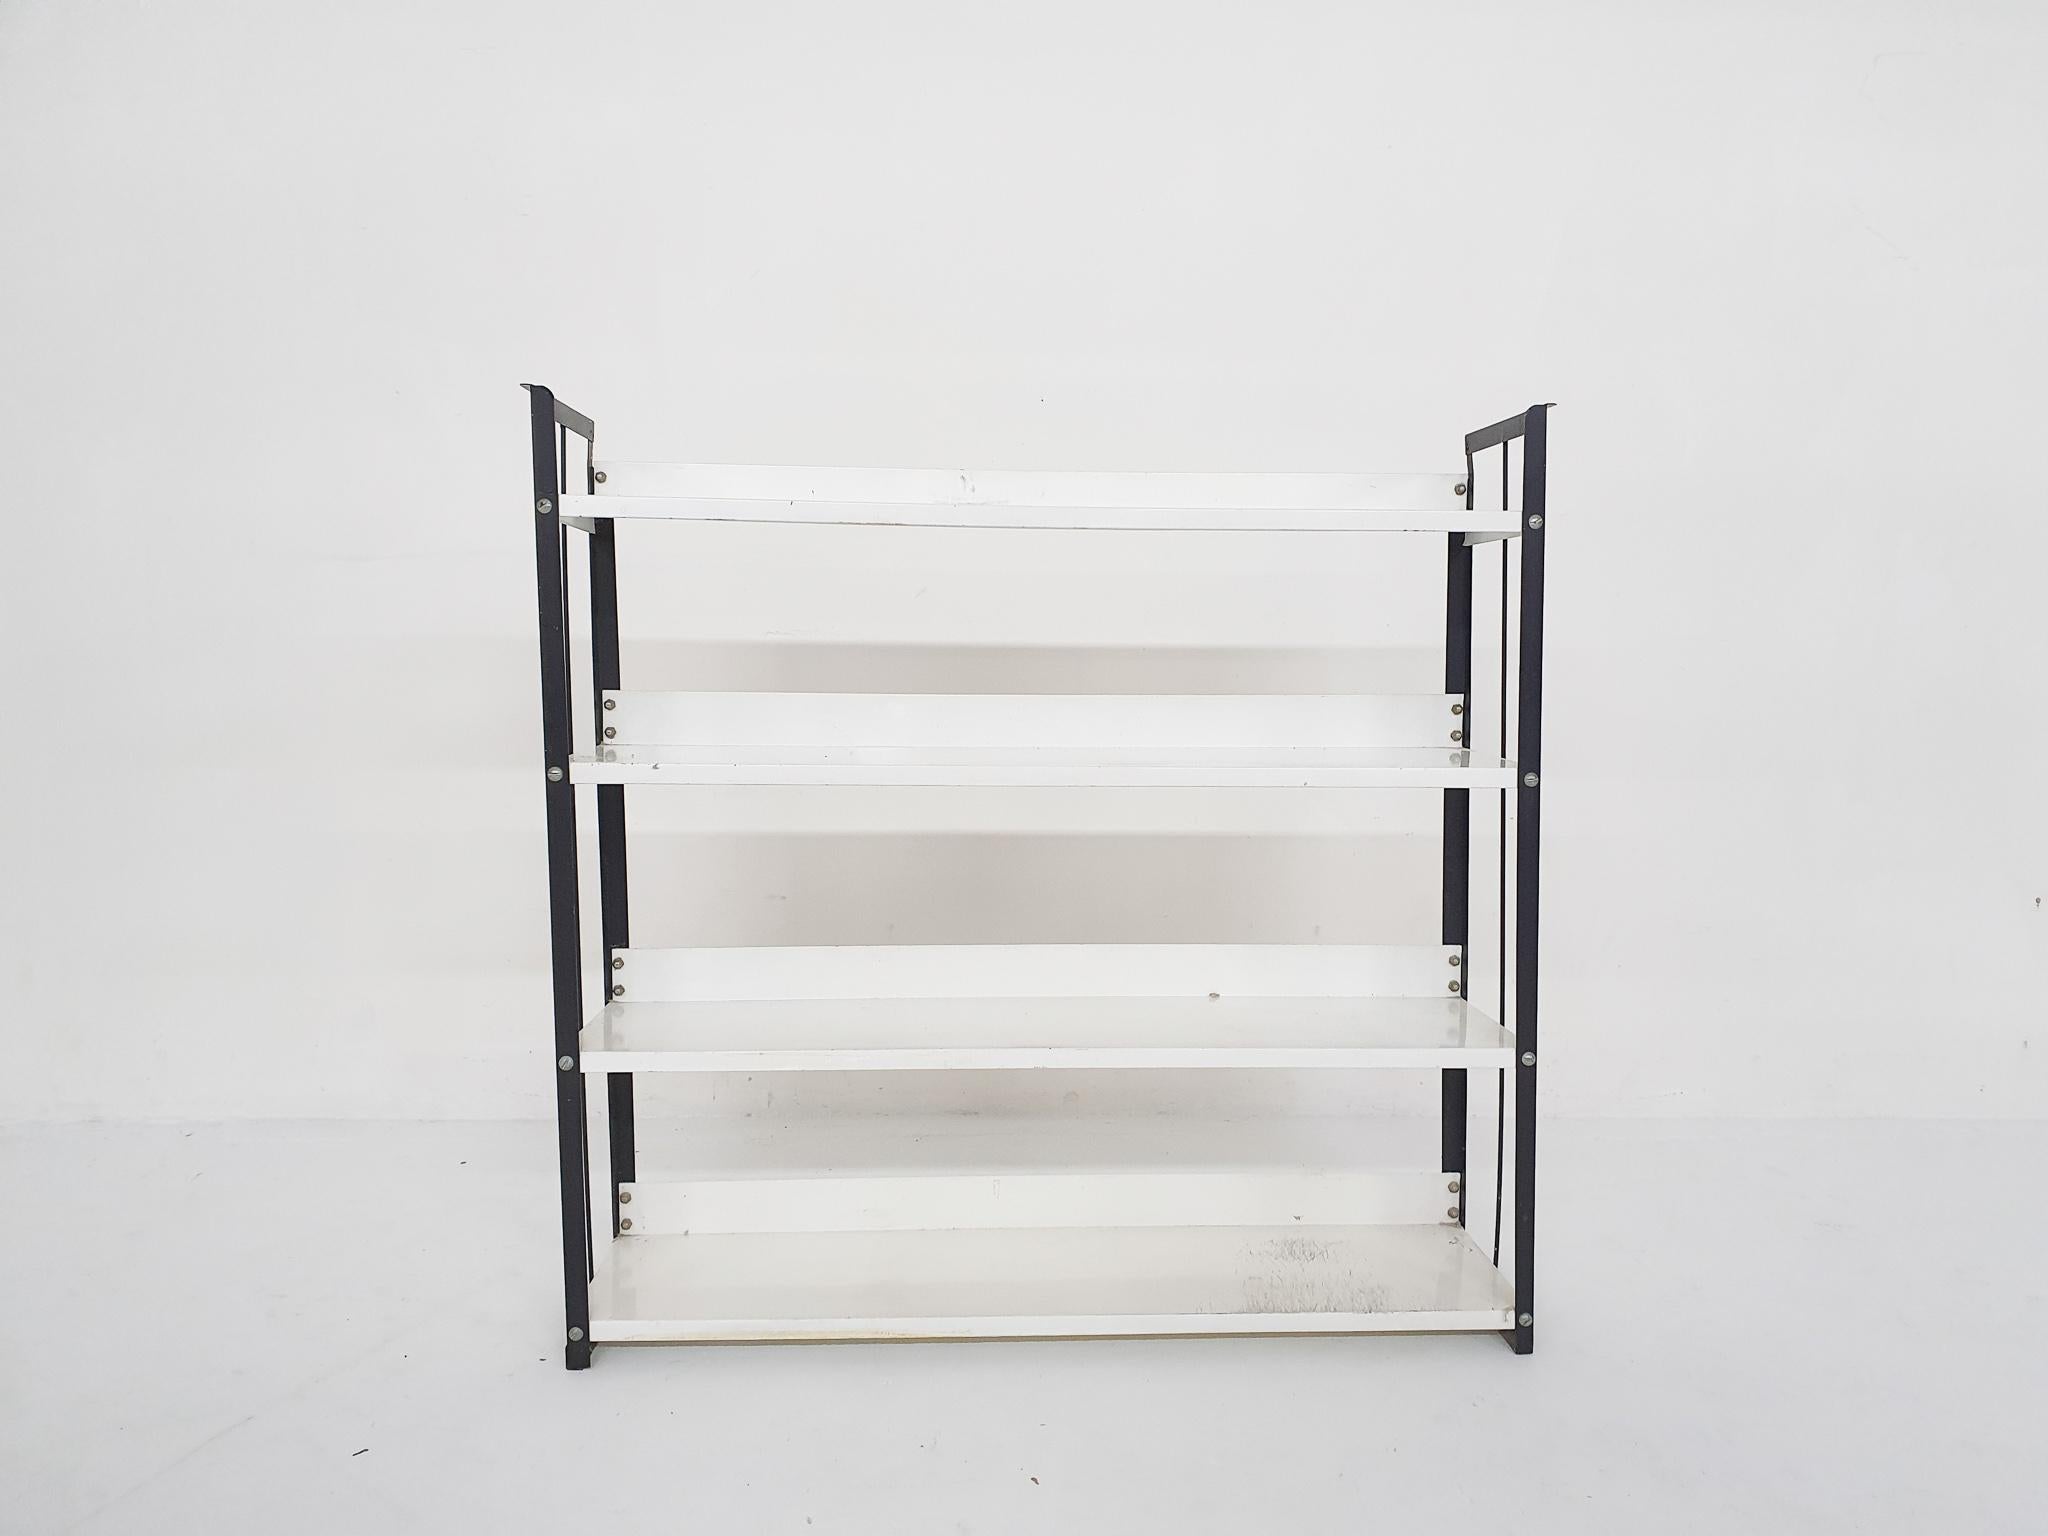 Free standing book shelves in black and white metal.
Some rust spots on the white shelves.